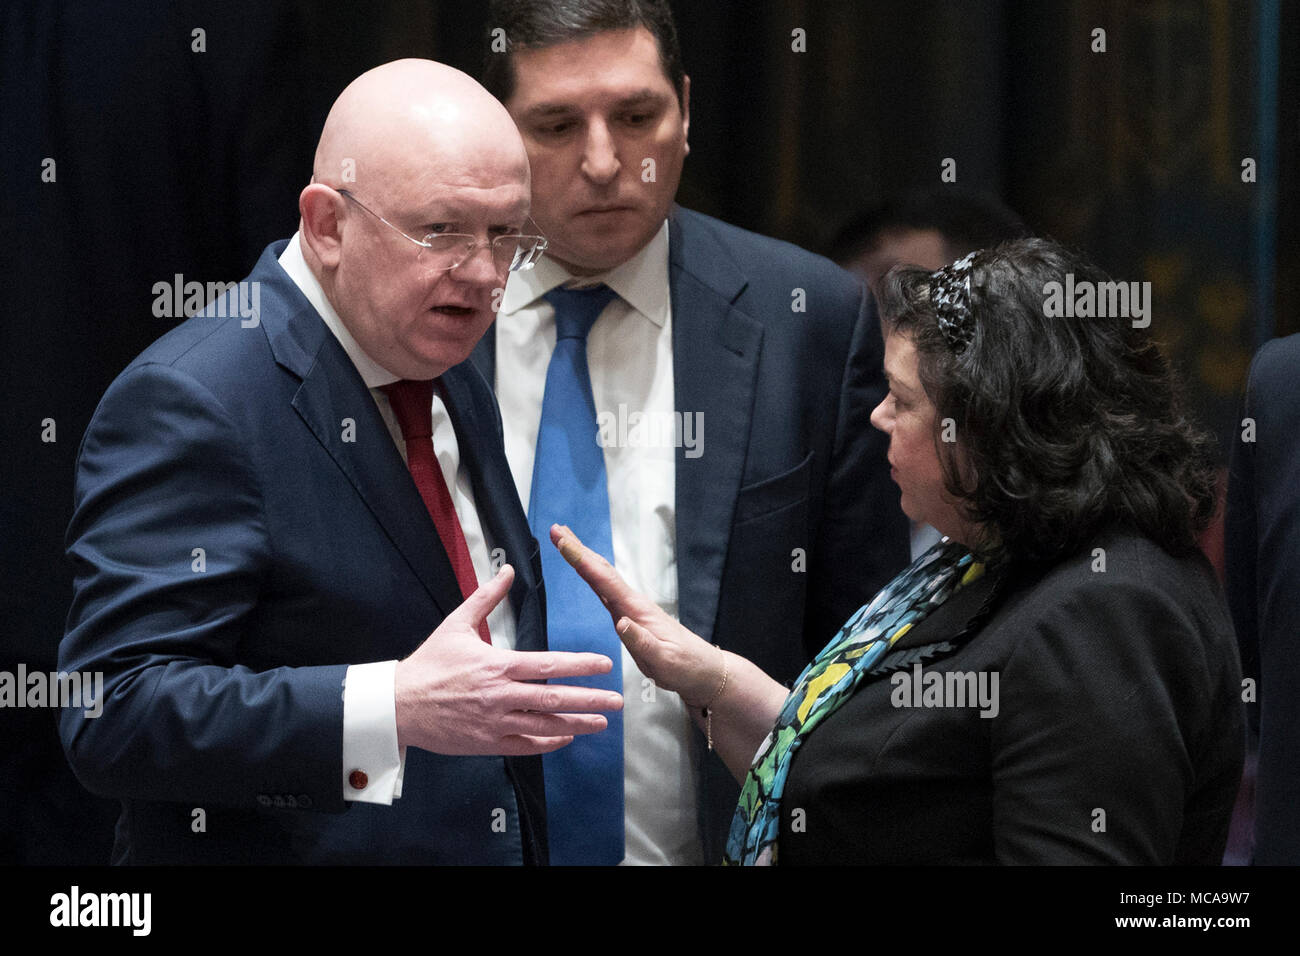 Untied Nations. 14th Apr, 2018. British Ambassador to the United Nations Karen Pierce (R front) talks to Russian Ambassador to UN Vassily Nebenzia(L front) before a Security Council emergency meeting on Syria at the UN headquarters in New York, April 14, 2018. A Russian-drafted resolution, which would have condemned the military strikes on Syria carried out by the United States, France and Britain, failed to be adopted by the Security Council. Credit: Li Muzi/Xinhua/Alamy Live News Stock Photo